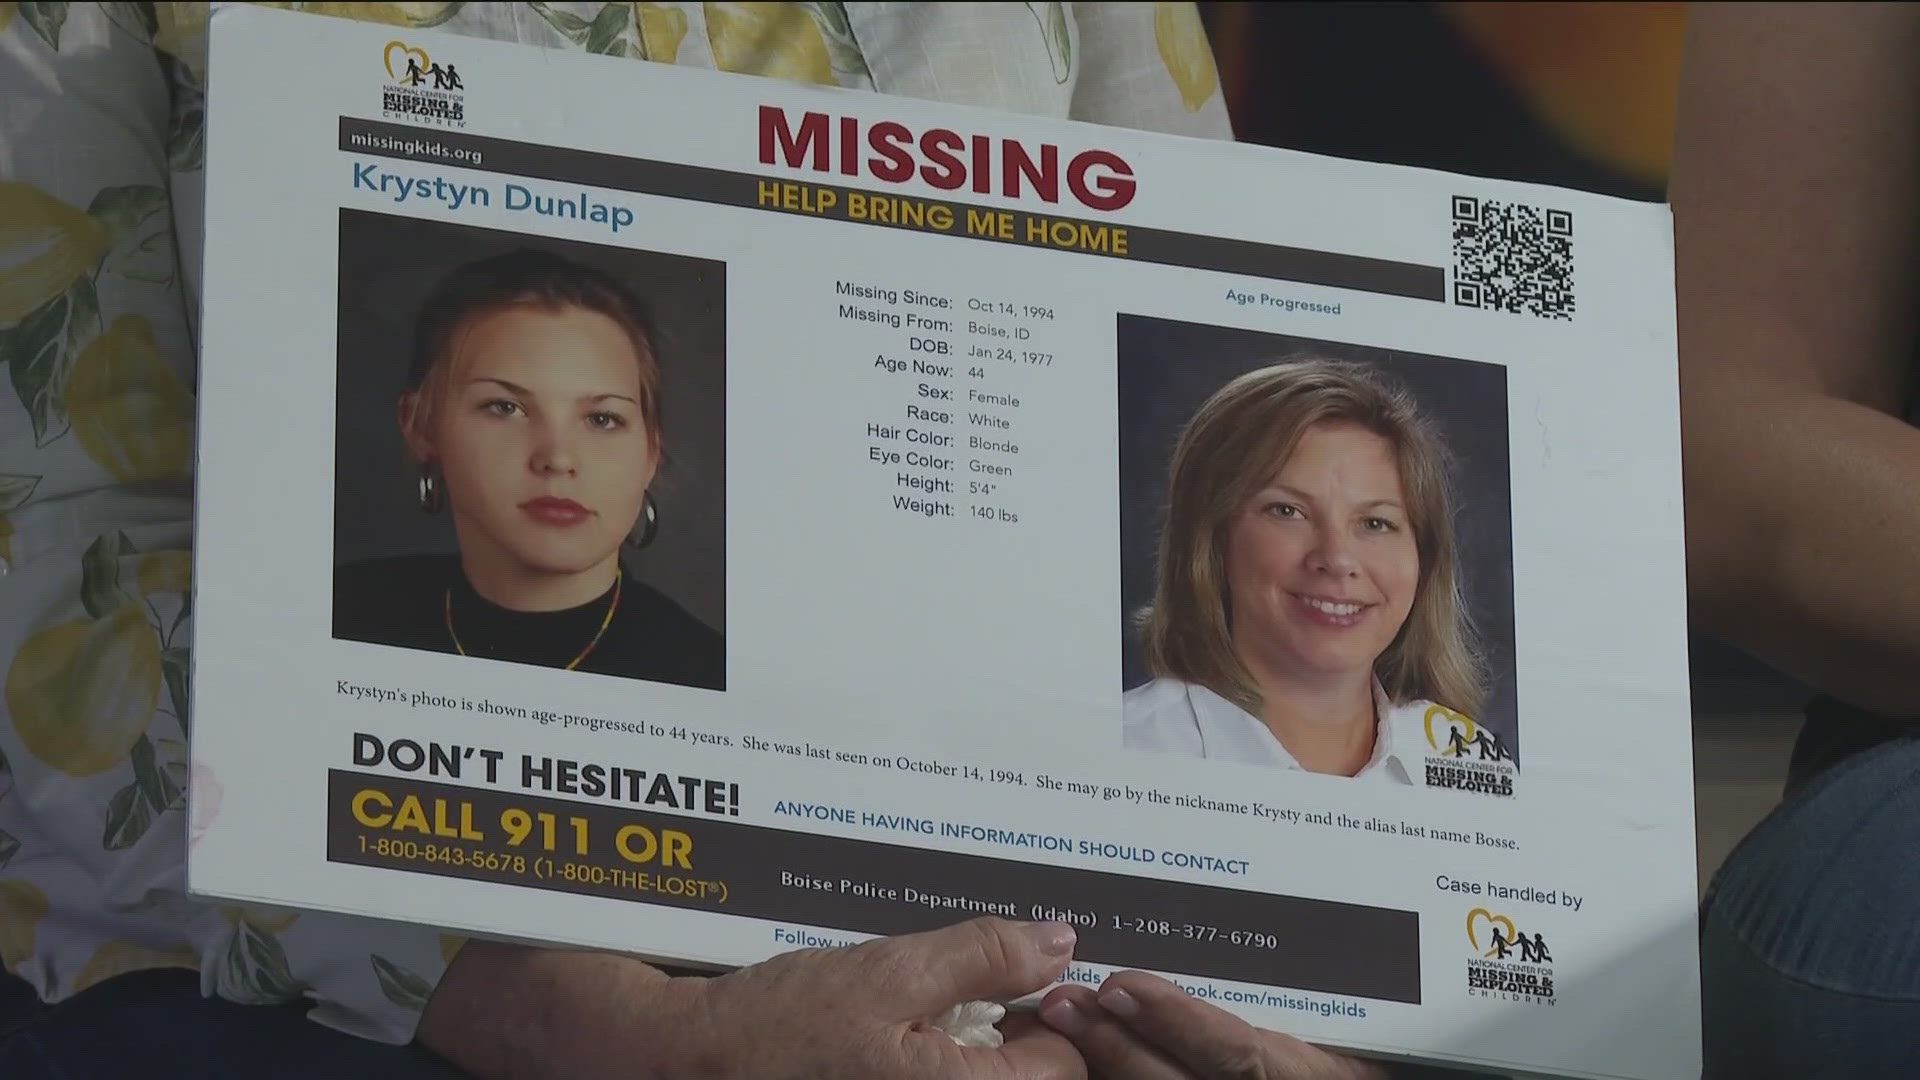 ISP established Idaho Missing Persons Awareness Day, which is commemorated every Sept. 14.